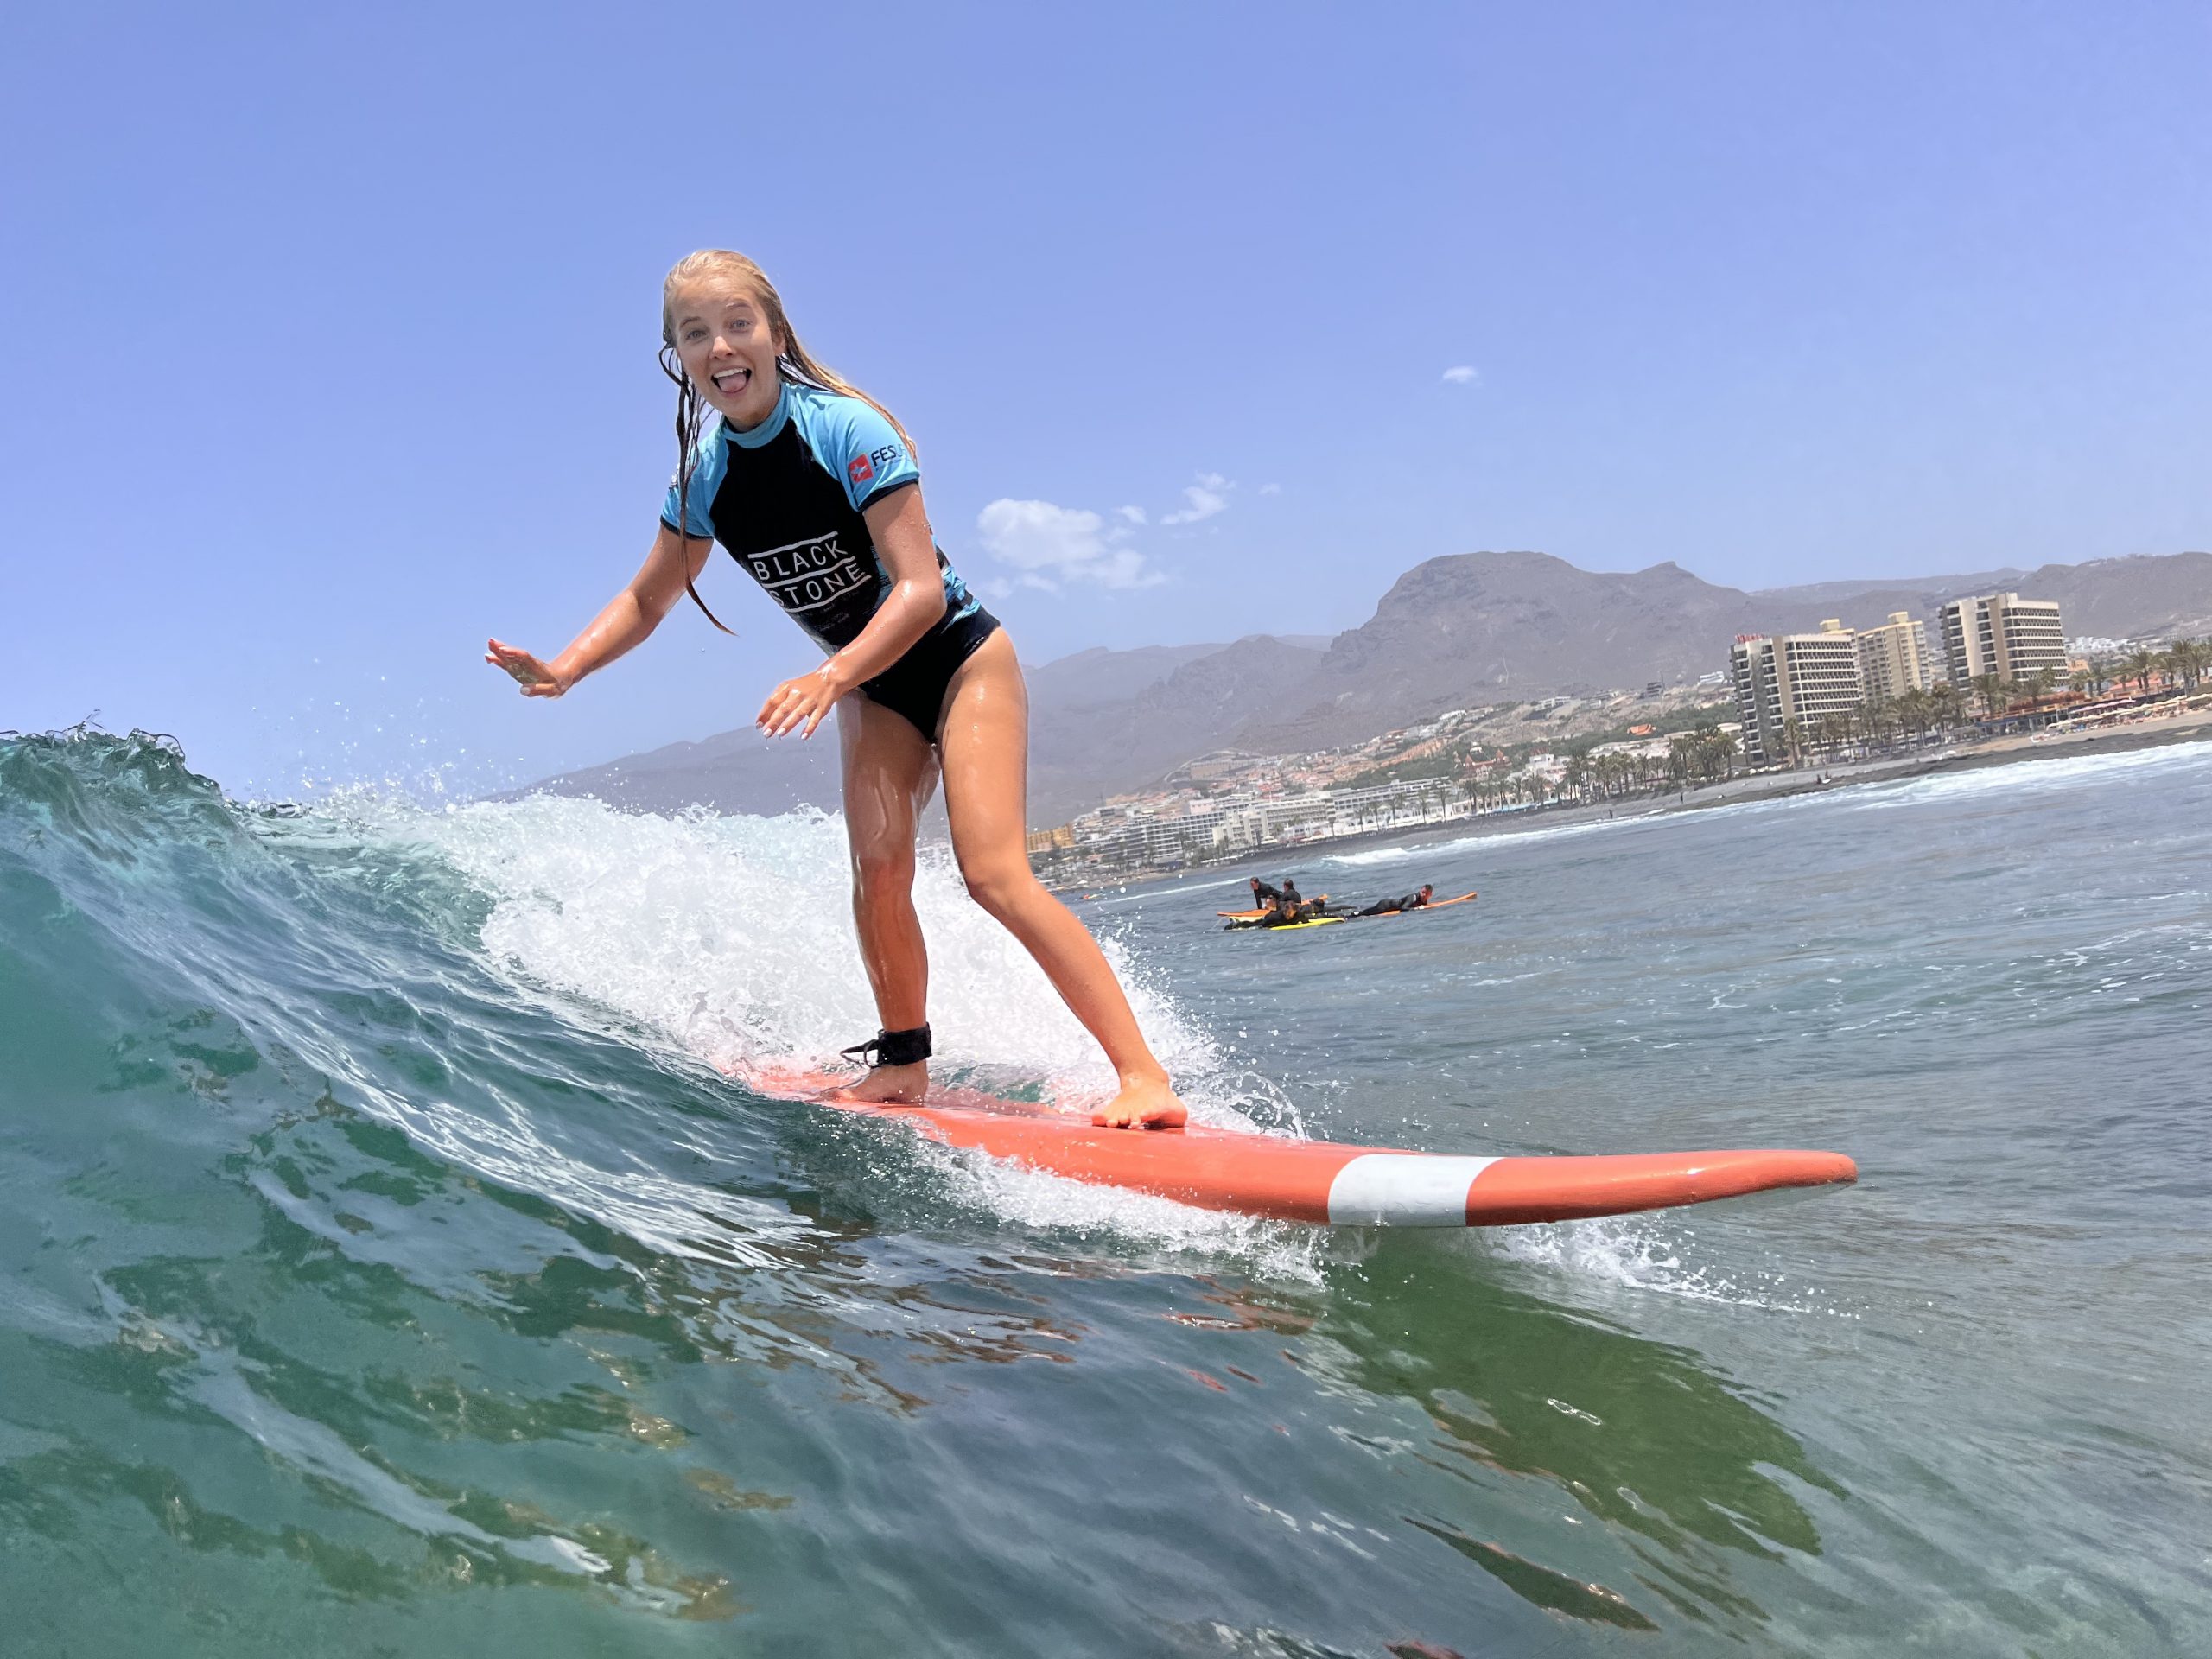 Blackstone Surf Center advanced surfer in Playa las Américas in Tenerife during a surf lesson